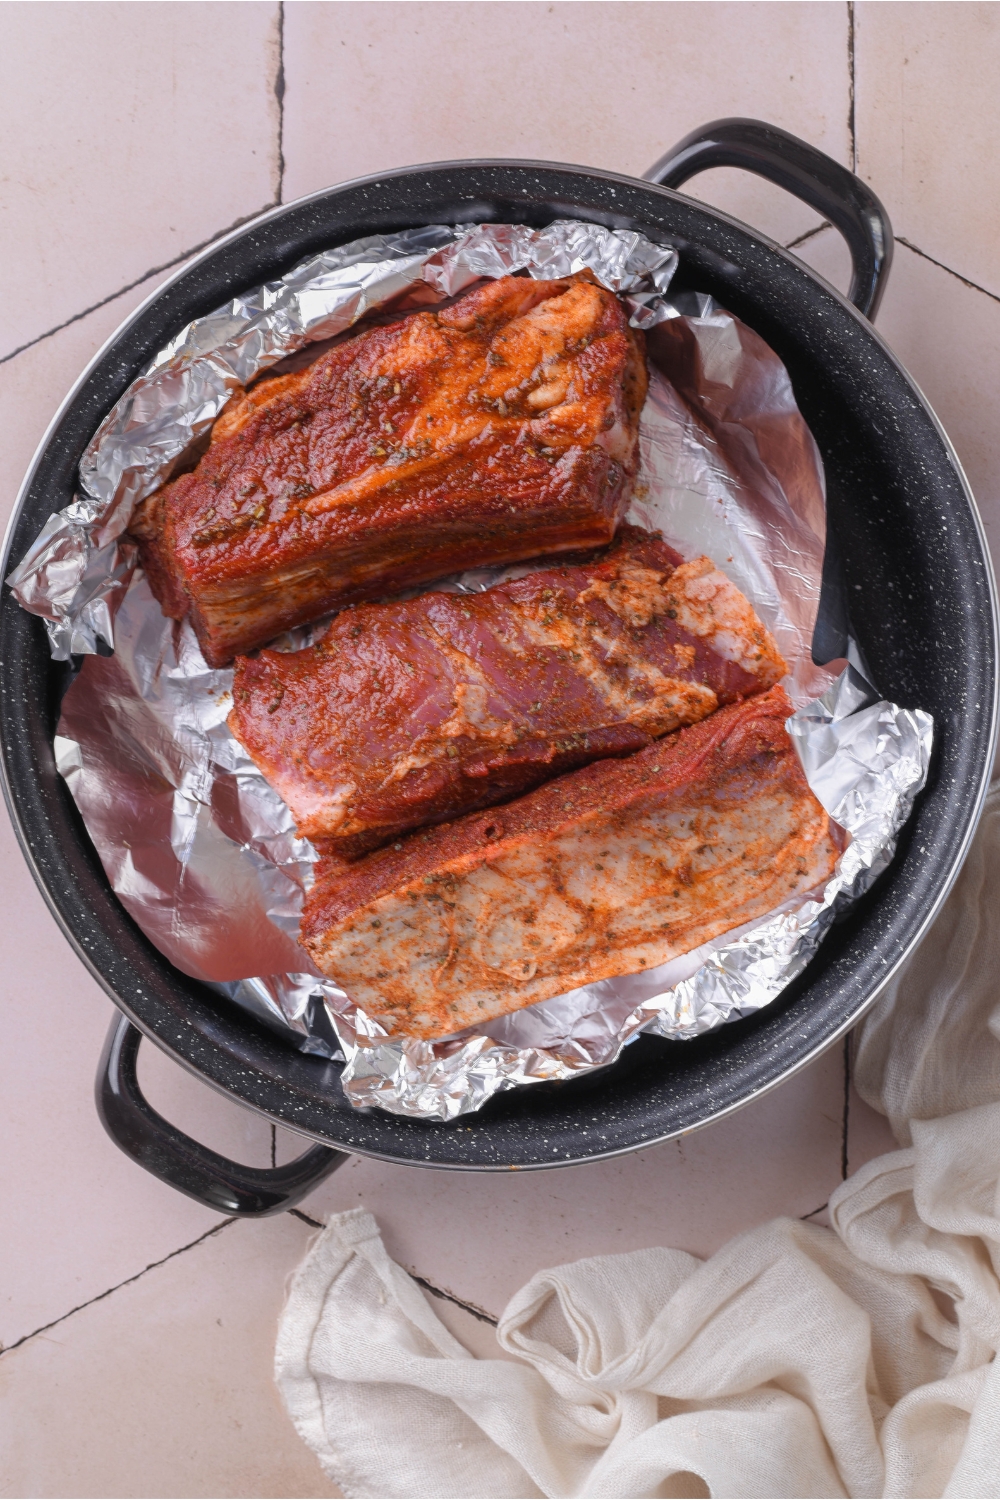 Three seasoned beef ribs in a baking dish and wrapped in aluminum foil.